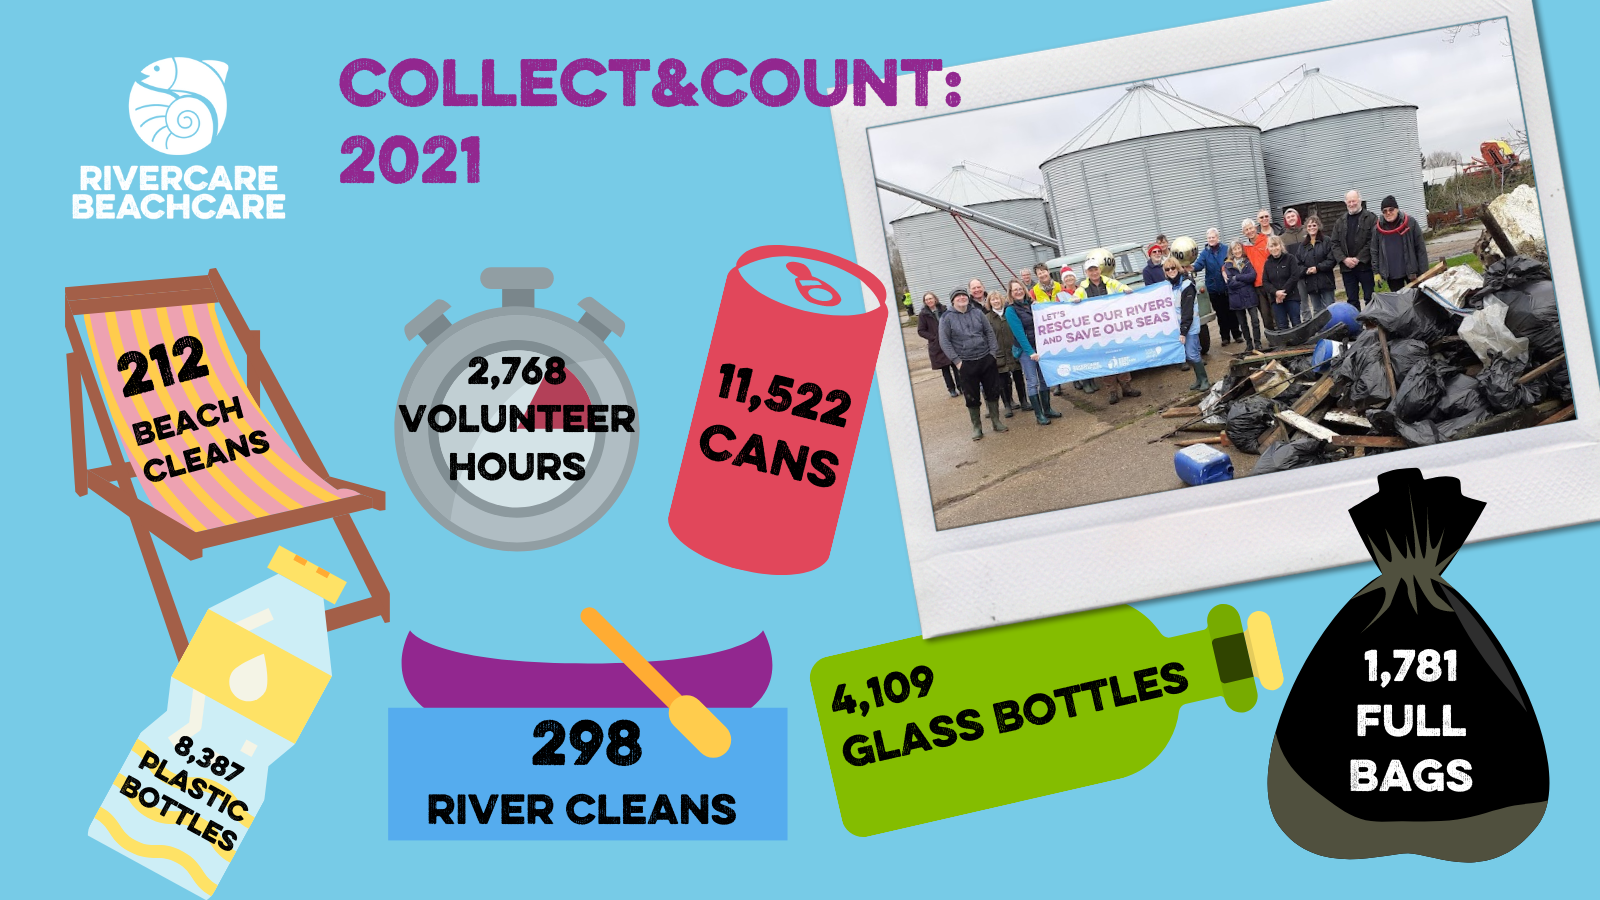 RiverCare volunteers' immense contribution in numbers